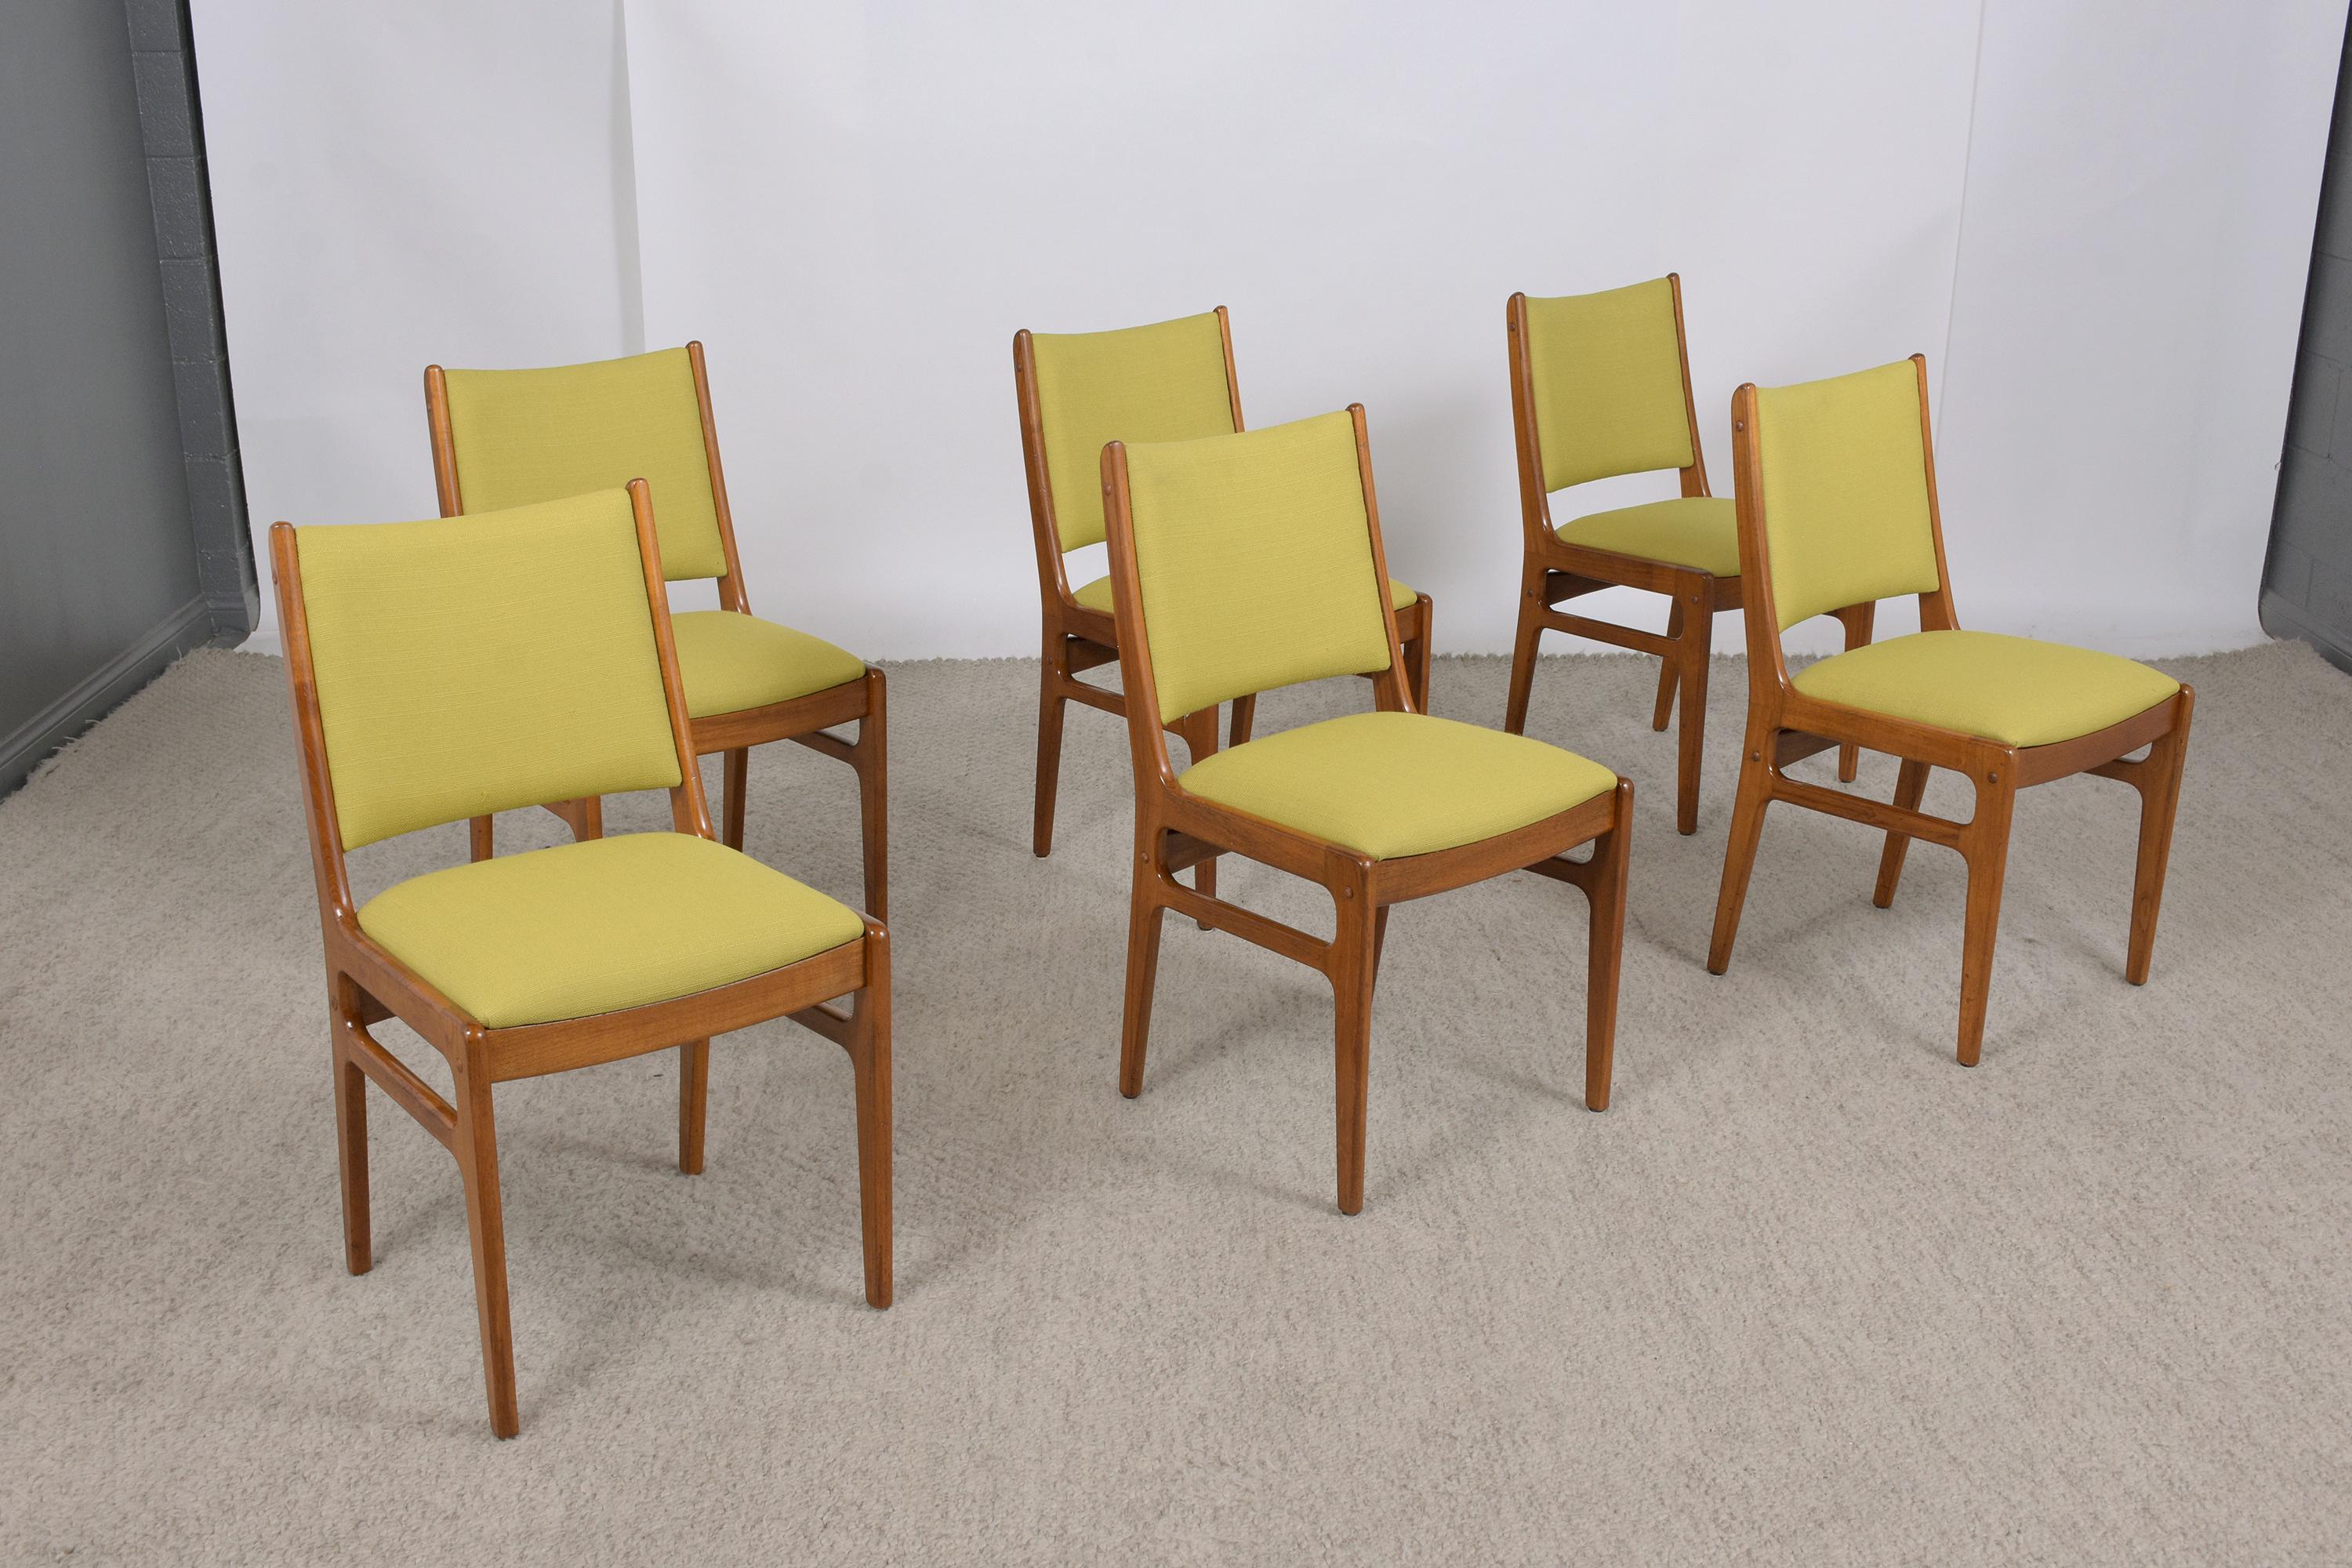 An exceptional set of six mid-century modern dining chairs hand-crafted out of walnut wood in great condition professionally restored by our team of craftsmen. This set of chairs features a sleek carved frame finished in a light walnut color with a